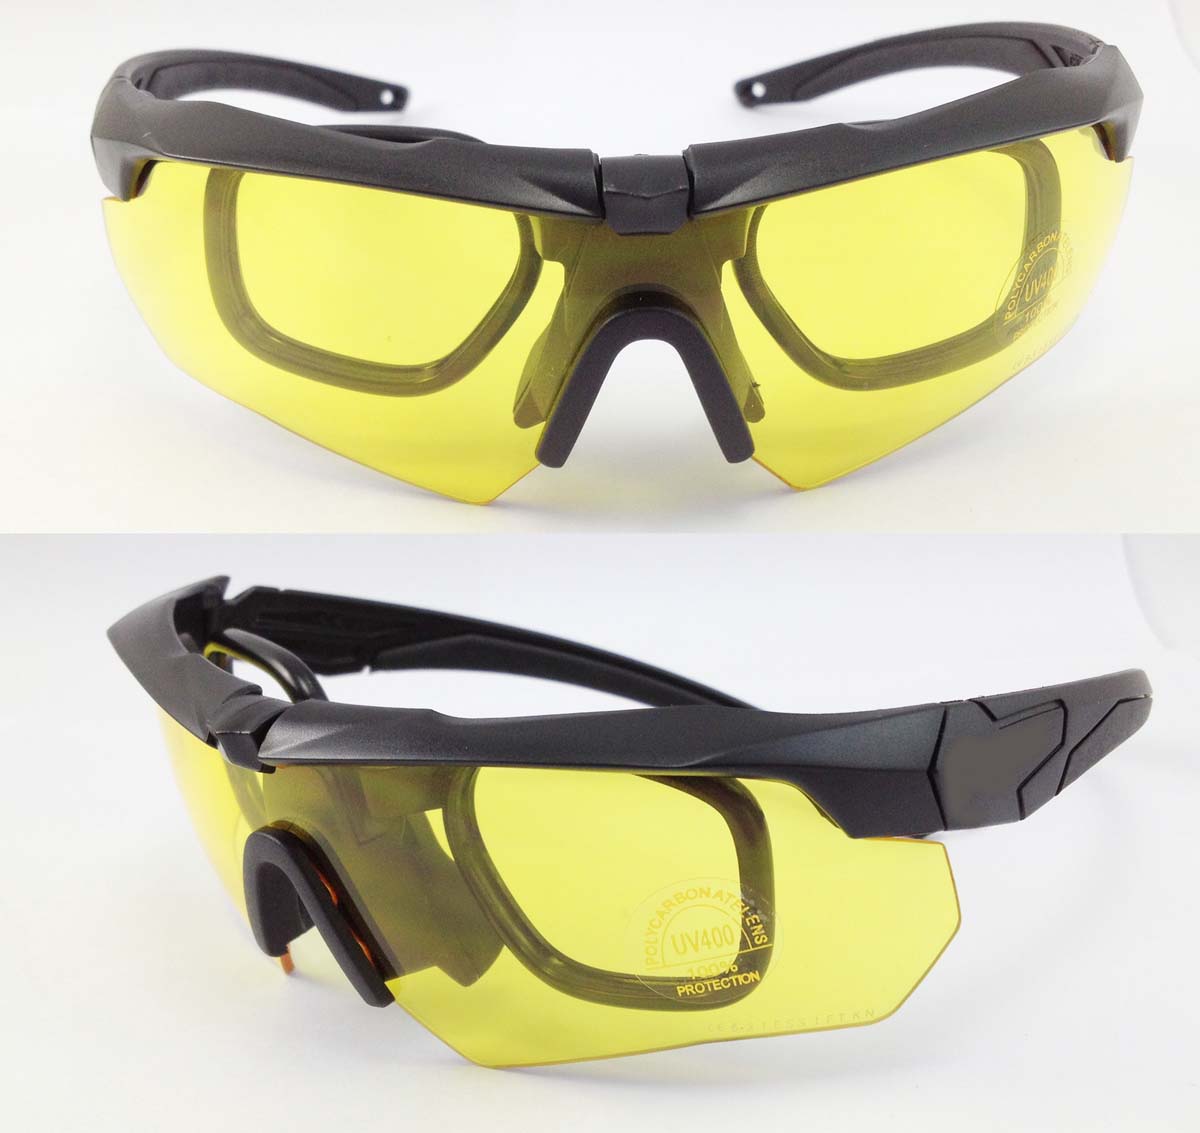 Unisex Thick Ultra Light with 3 Interchangeable Color Lense Cycling Sunglasses